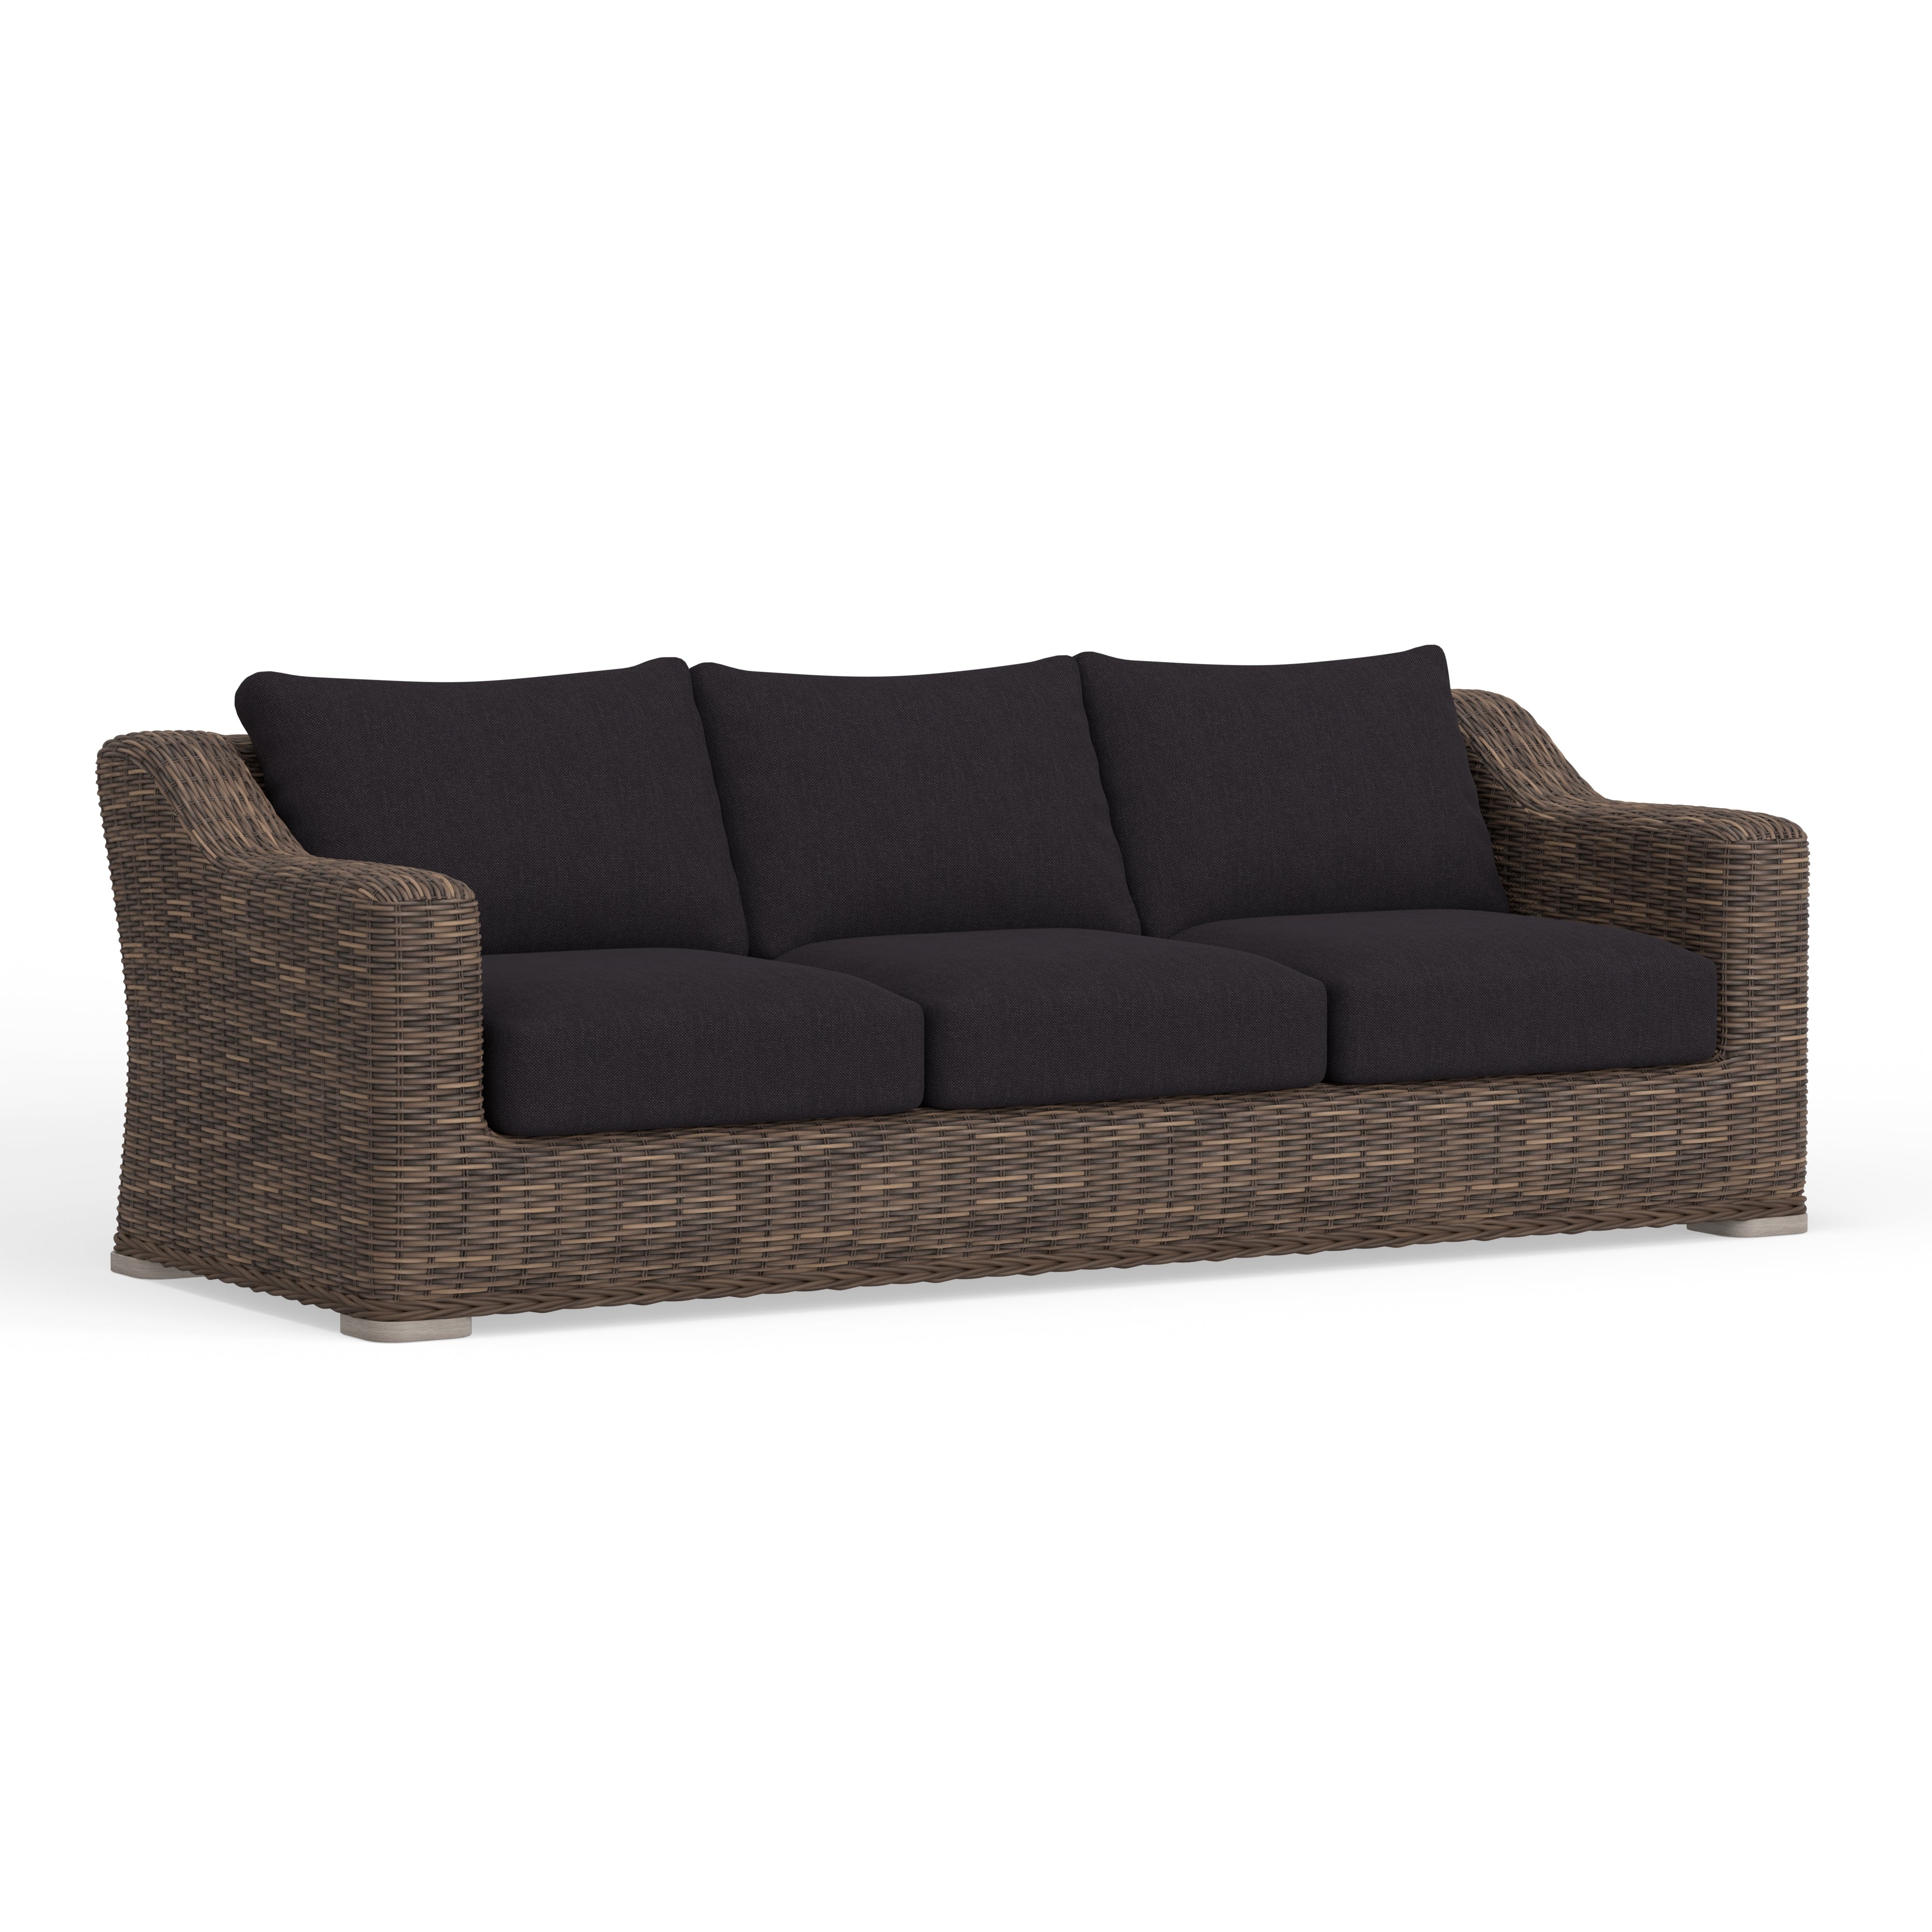 Harbor Classic Luxury Outdoor Wicker Seating For Five